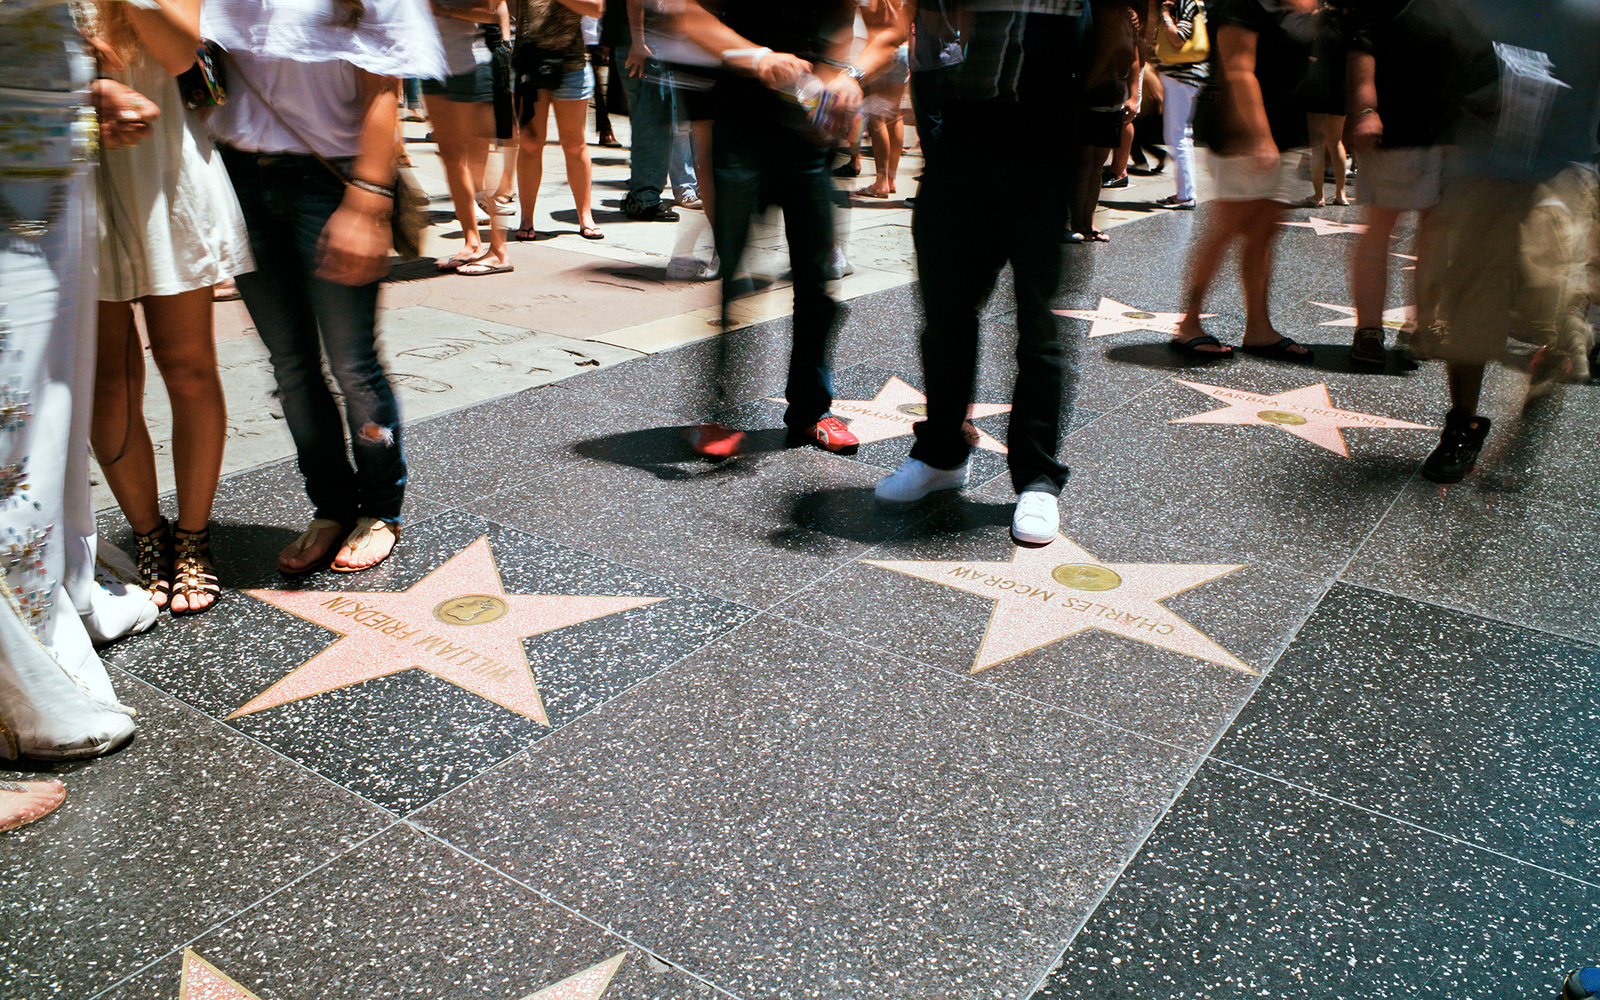 Hollywood Walk of Fame, Los Angeles